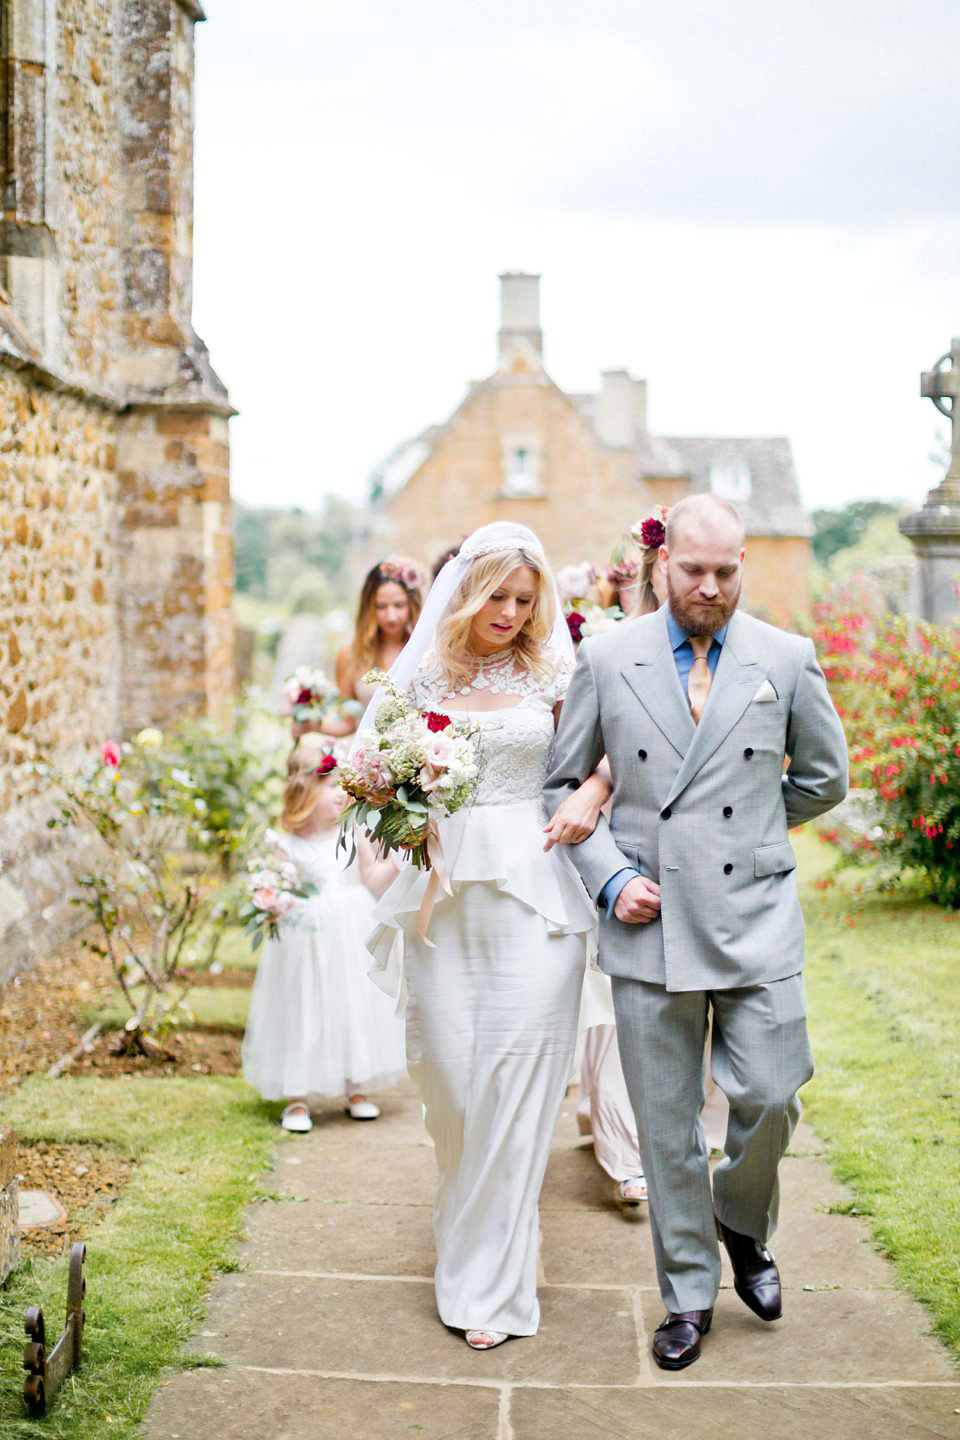 George wears a Temperley London gown with beautiful peplum detail for her eccentric, quirky and elegant Aynhoe Park wedding. Photography by Caught The Light.